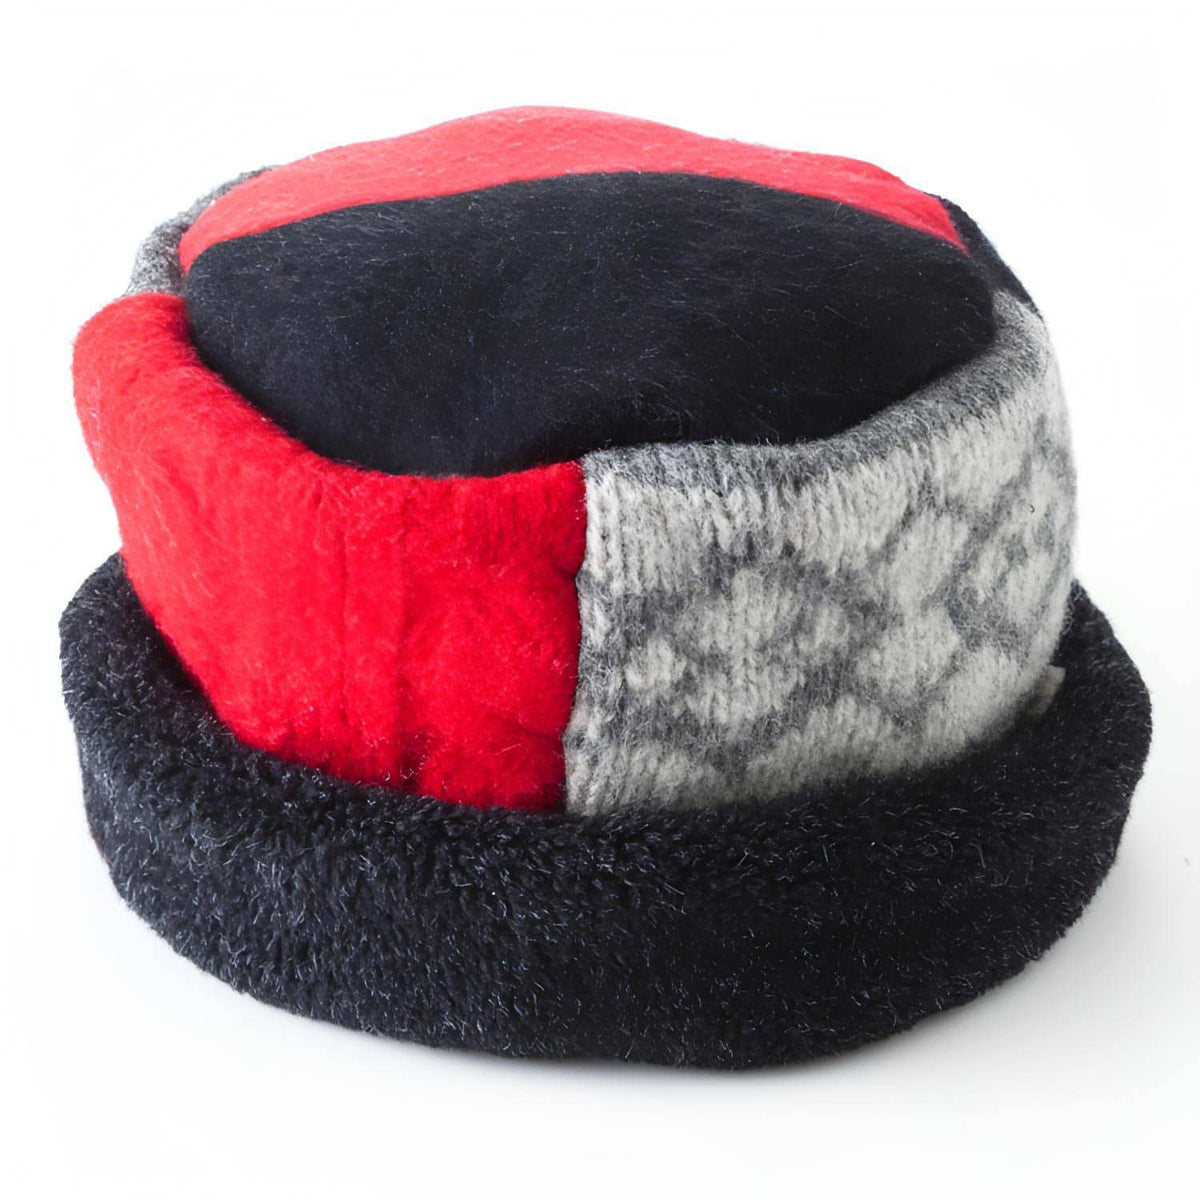 Rolled Pillbox Hat | Vintage Inspired Wool Hat | Upcycled Winter Hat Red, Black, Grey